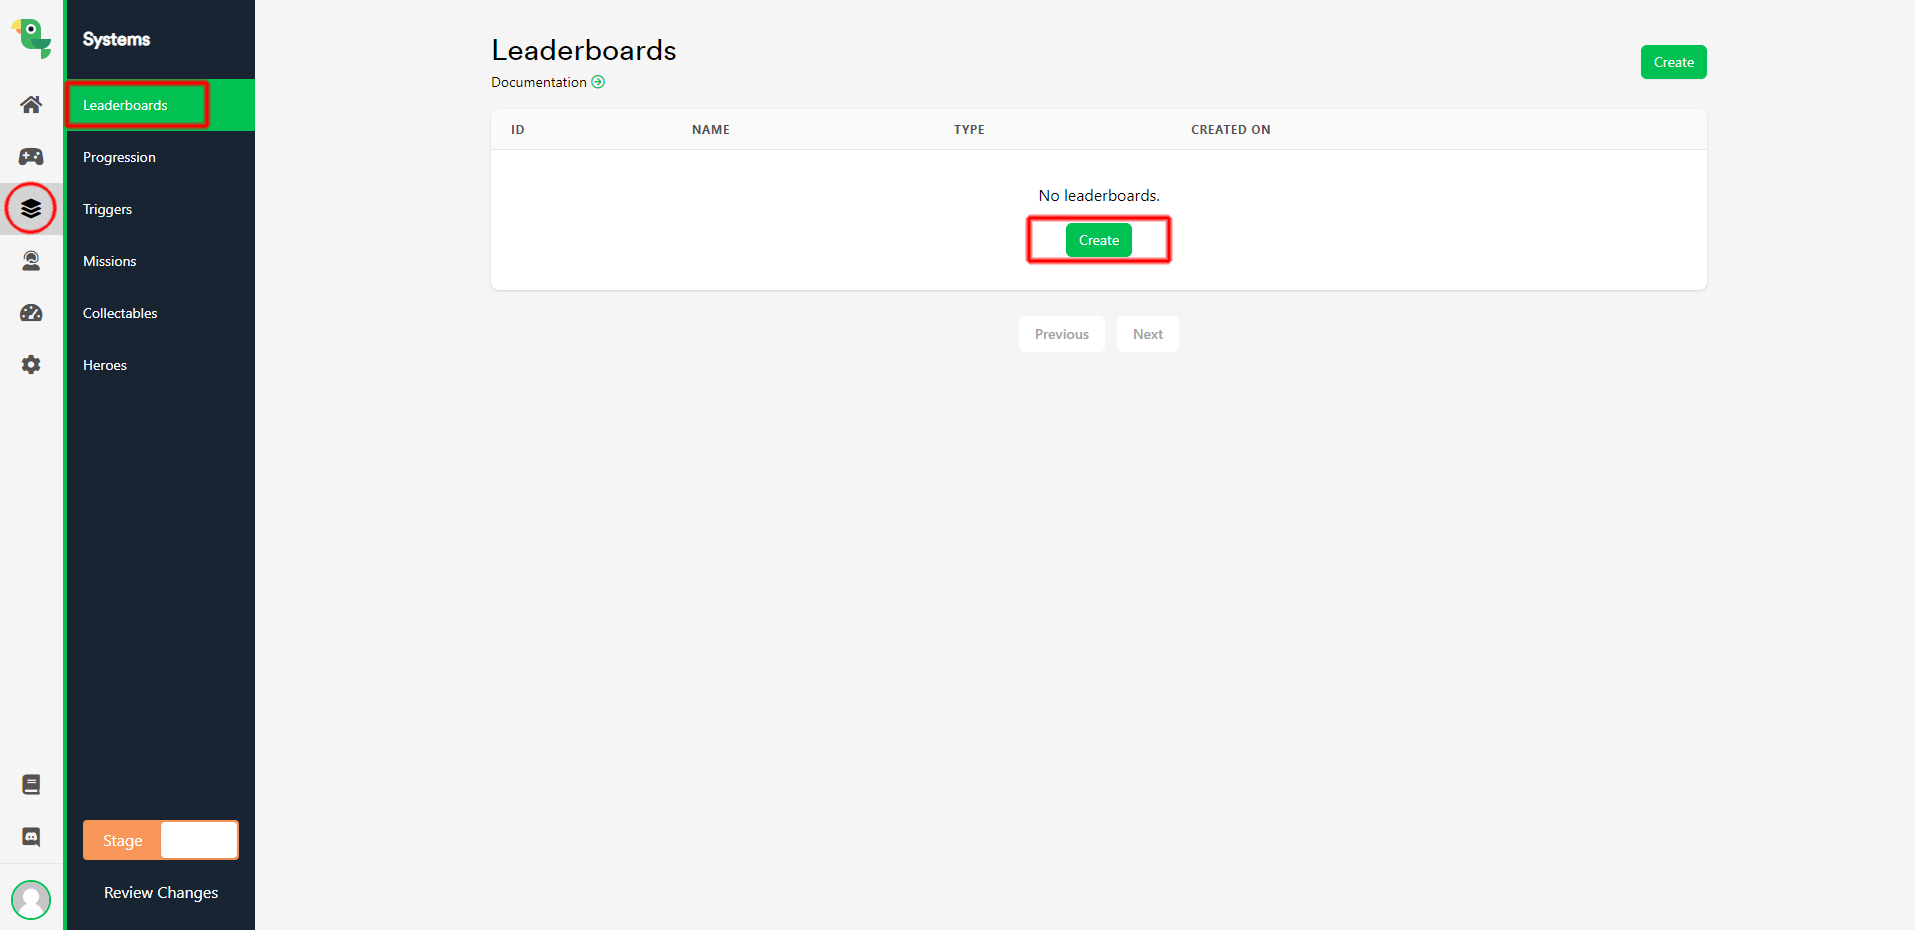 Submit Scores To Leaderboards - LootLocker